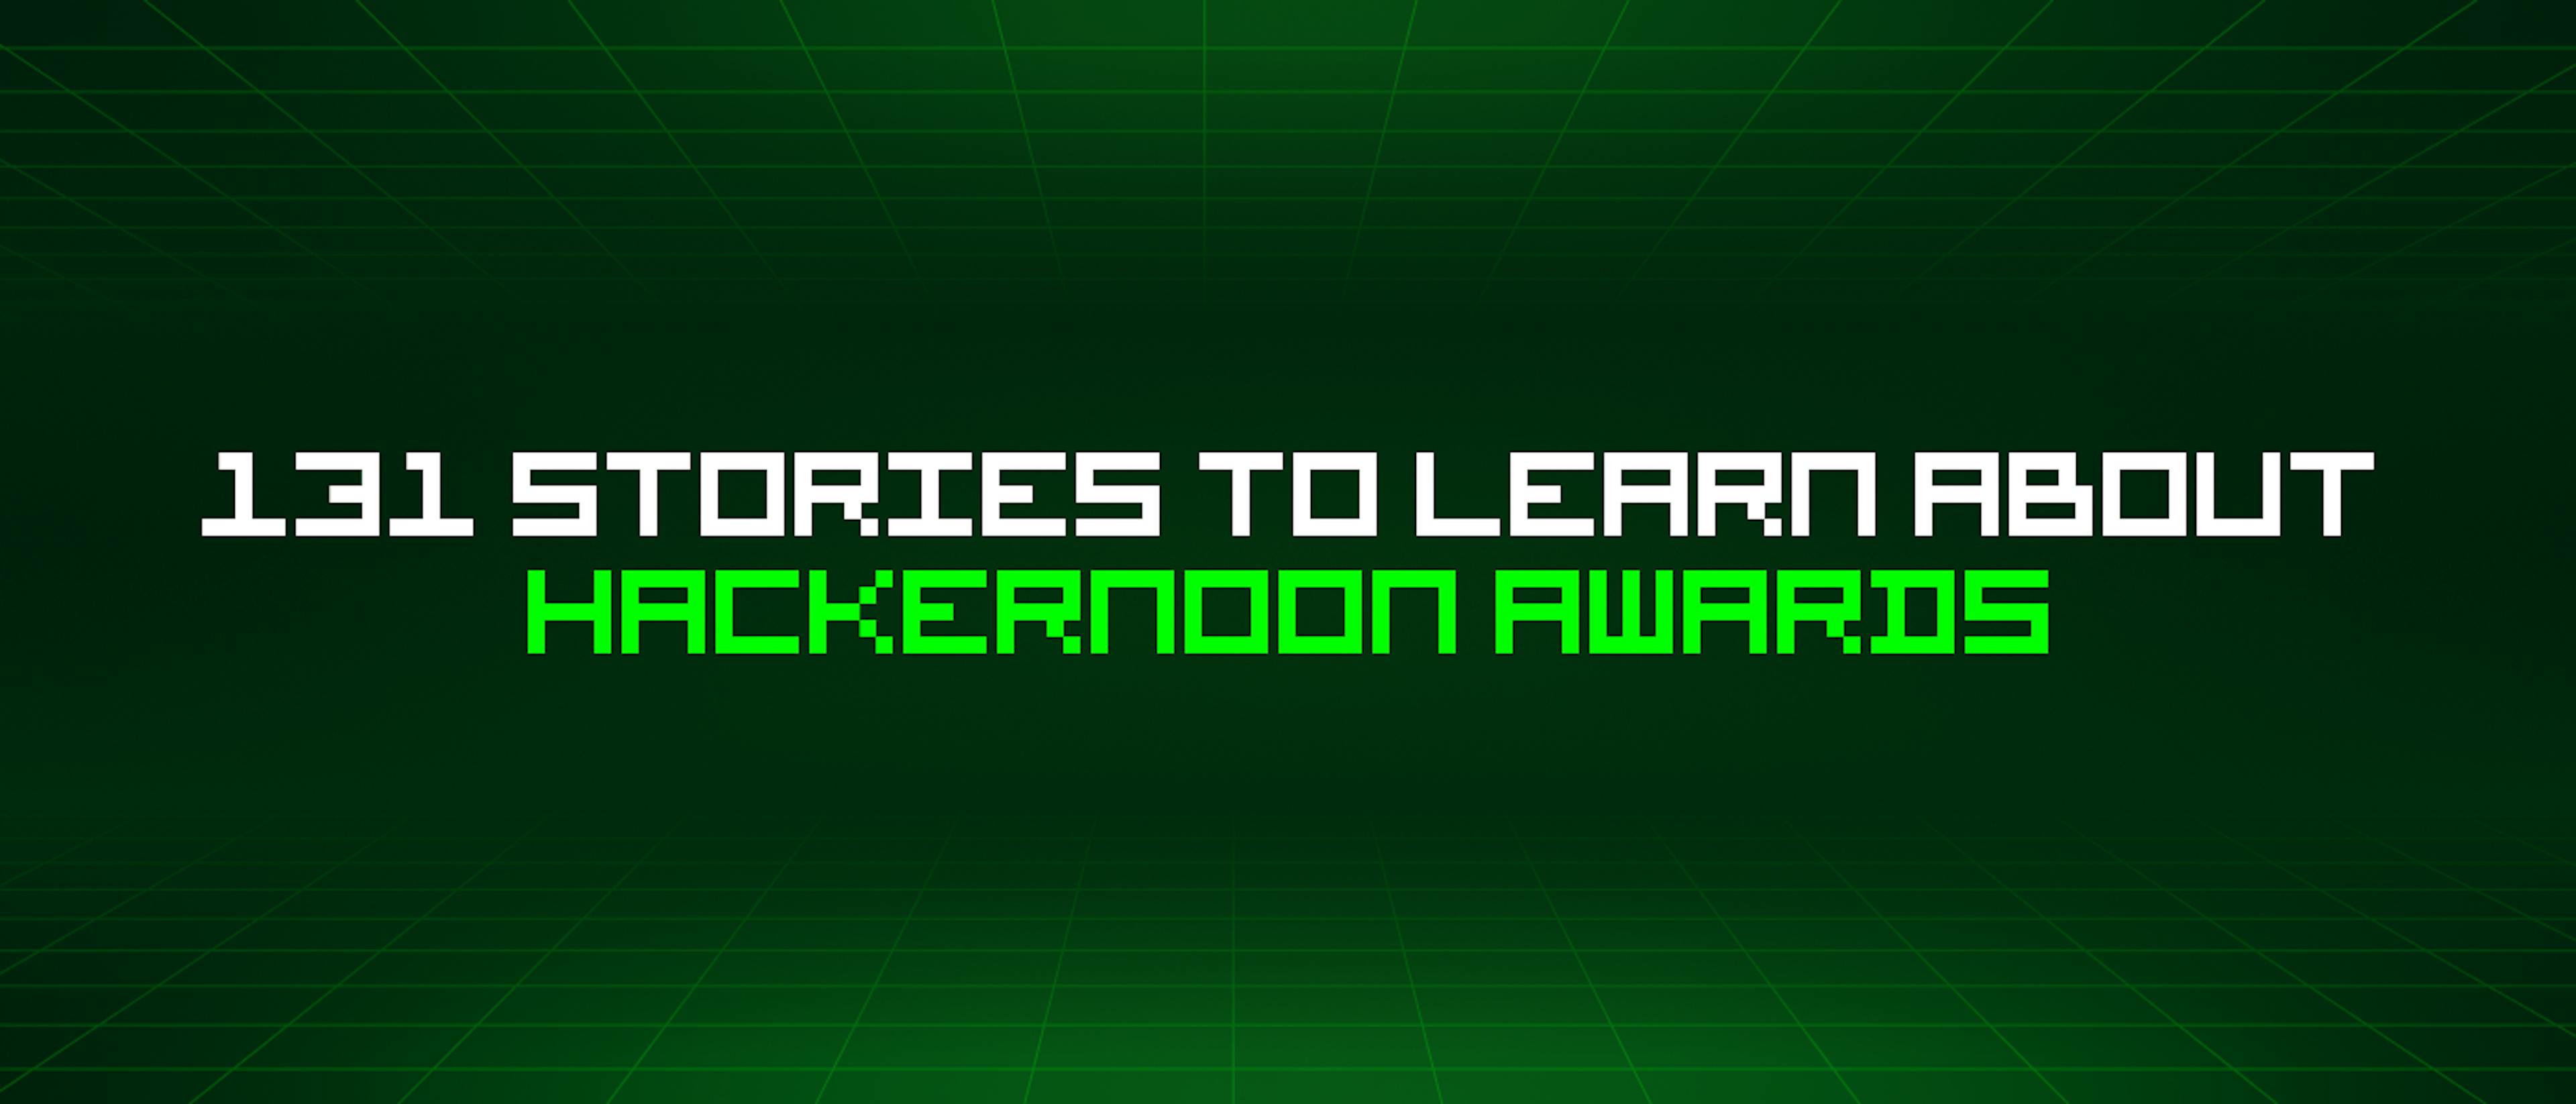 featured image - 131 Stories To Learn About Hackernoon Awards